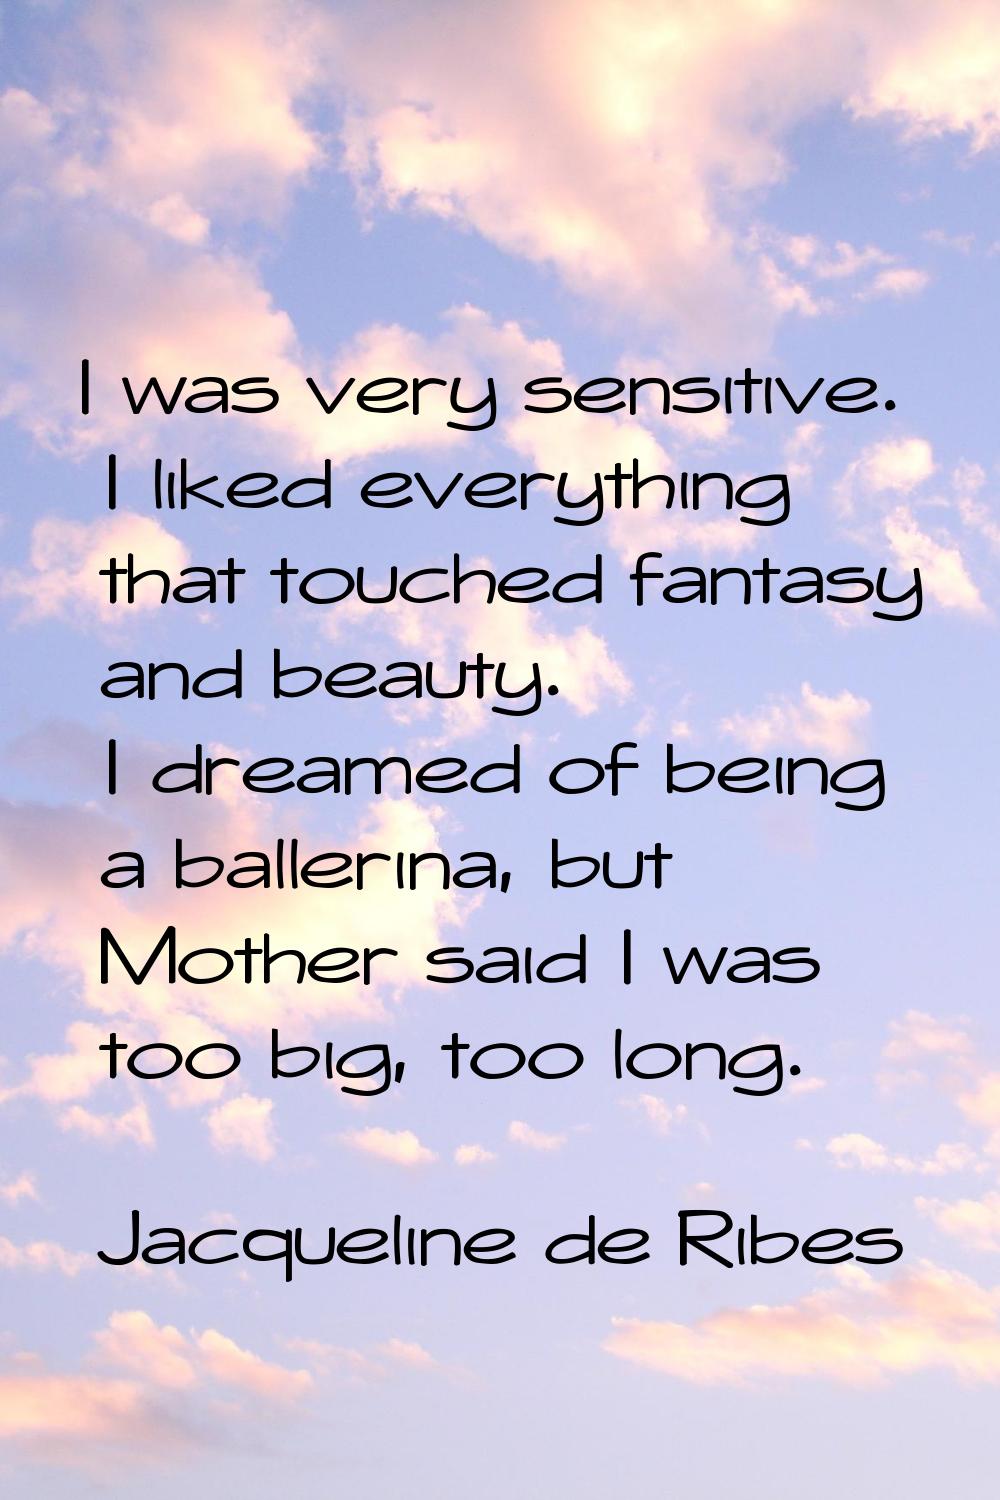 I was very sensitive. I liked everything that touched fantasy and beauty. I dreamed of being a ball